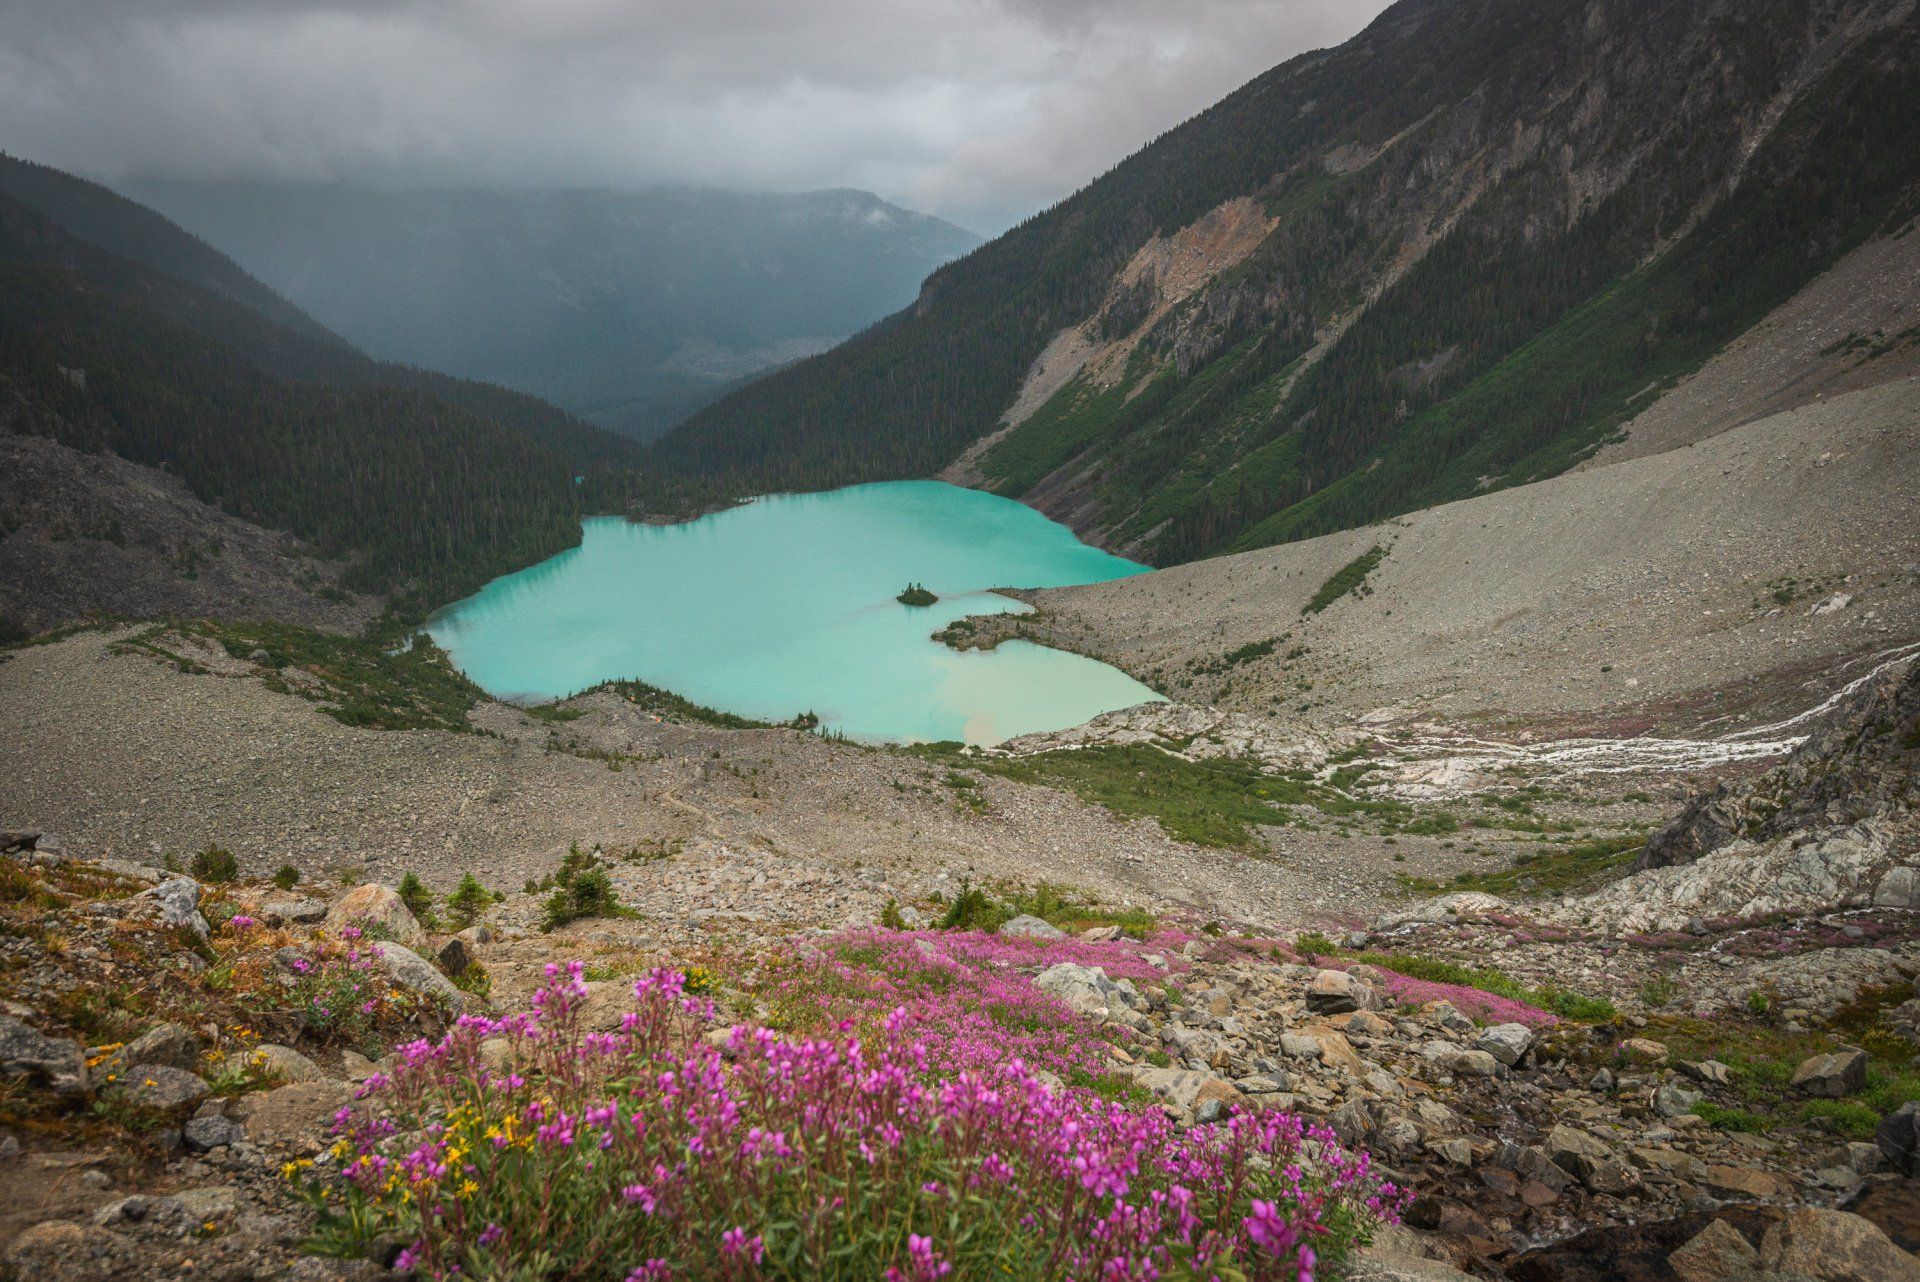 View of the upper Joffre lake from above with alpine flower meadows in the front, Joffre Lakes Provincial Park, BC, Canada